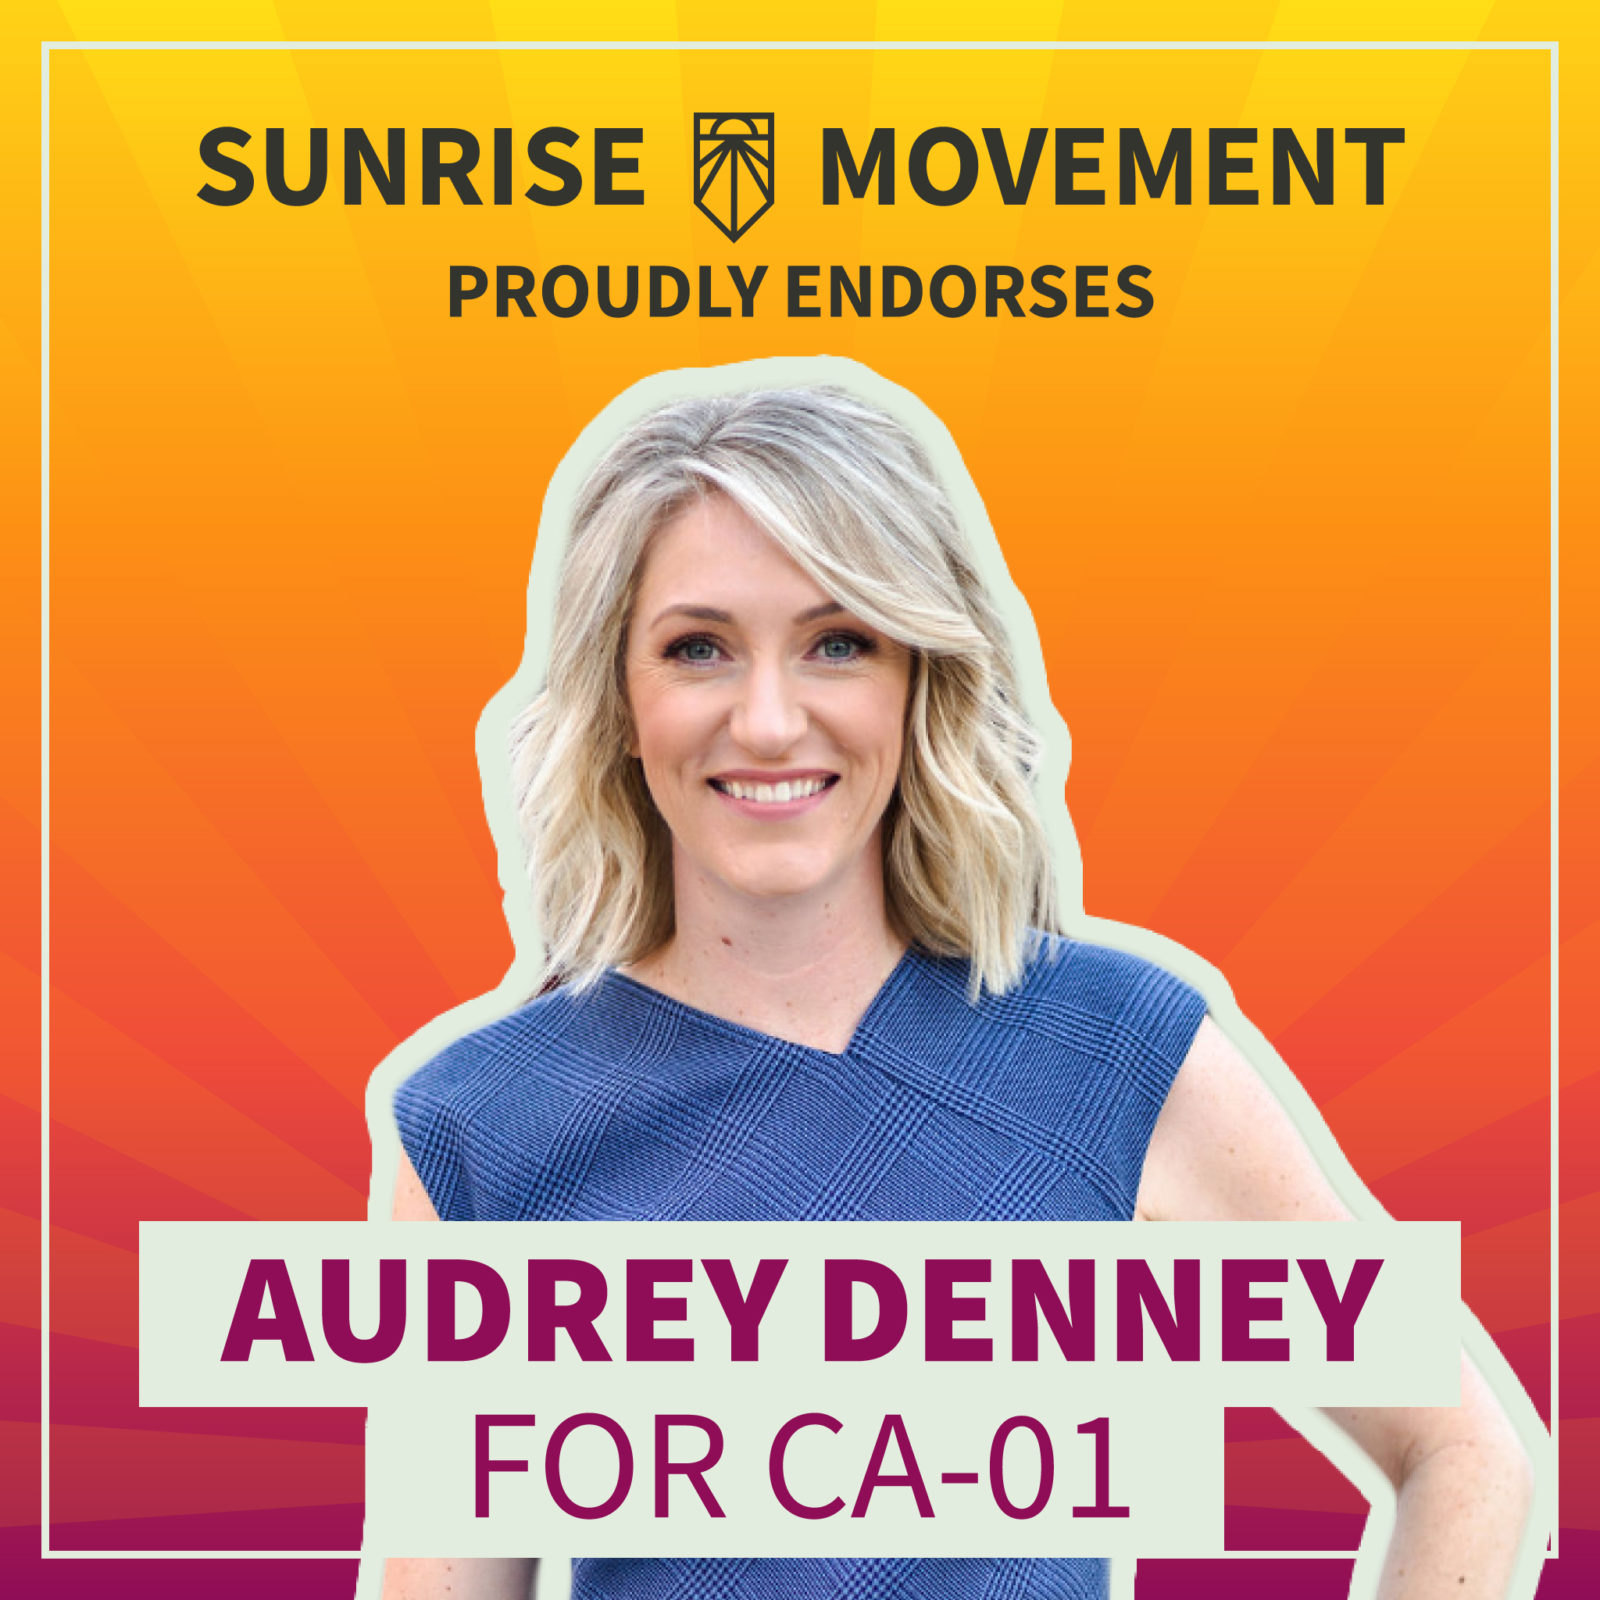 A photo of Audrey Denney with text: Sunrise Movement proudly endorses Audrey Denney for CA-01